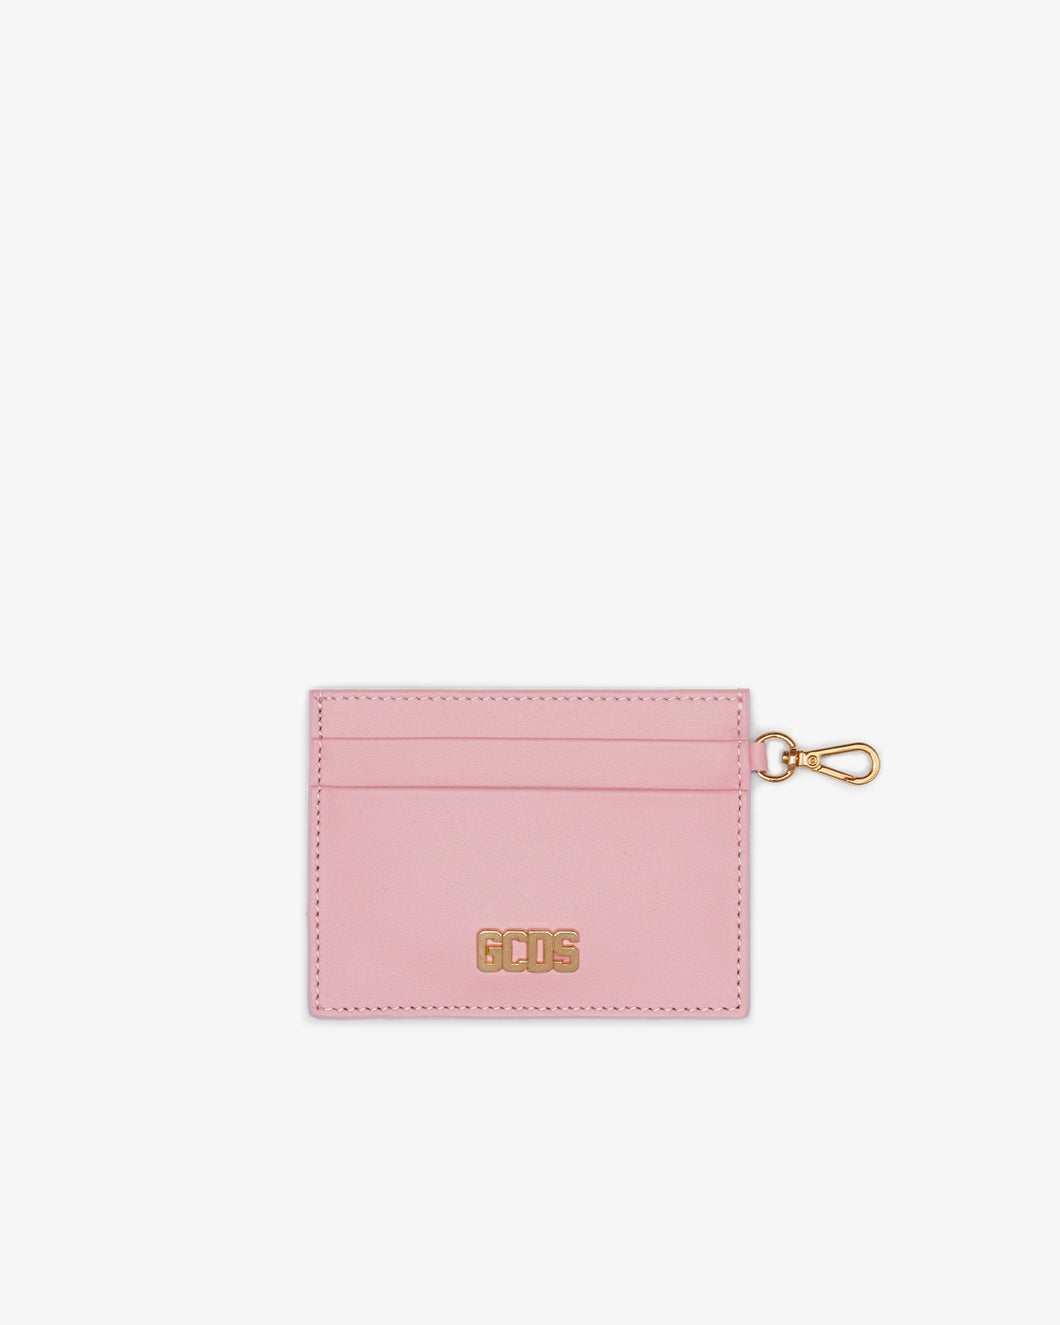 Comma Card Holder | Unisex Small Leather Goods Pink | GCDS®